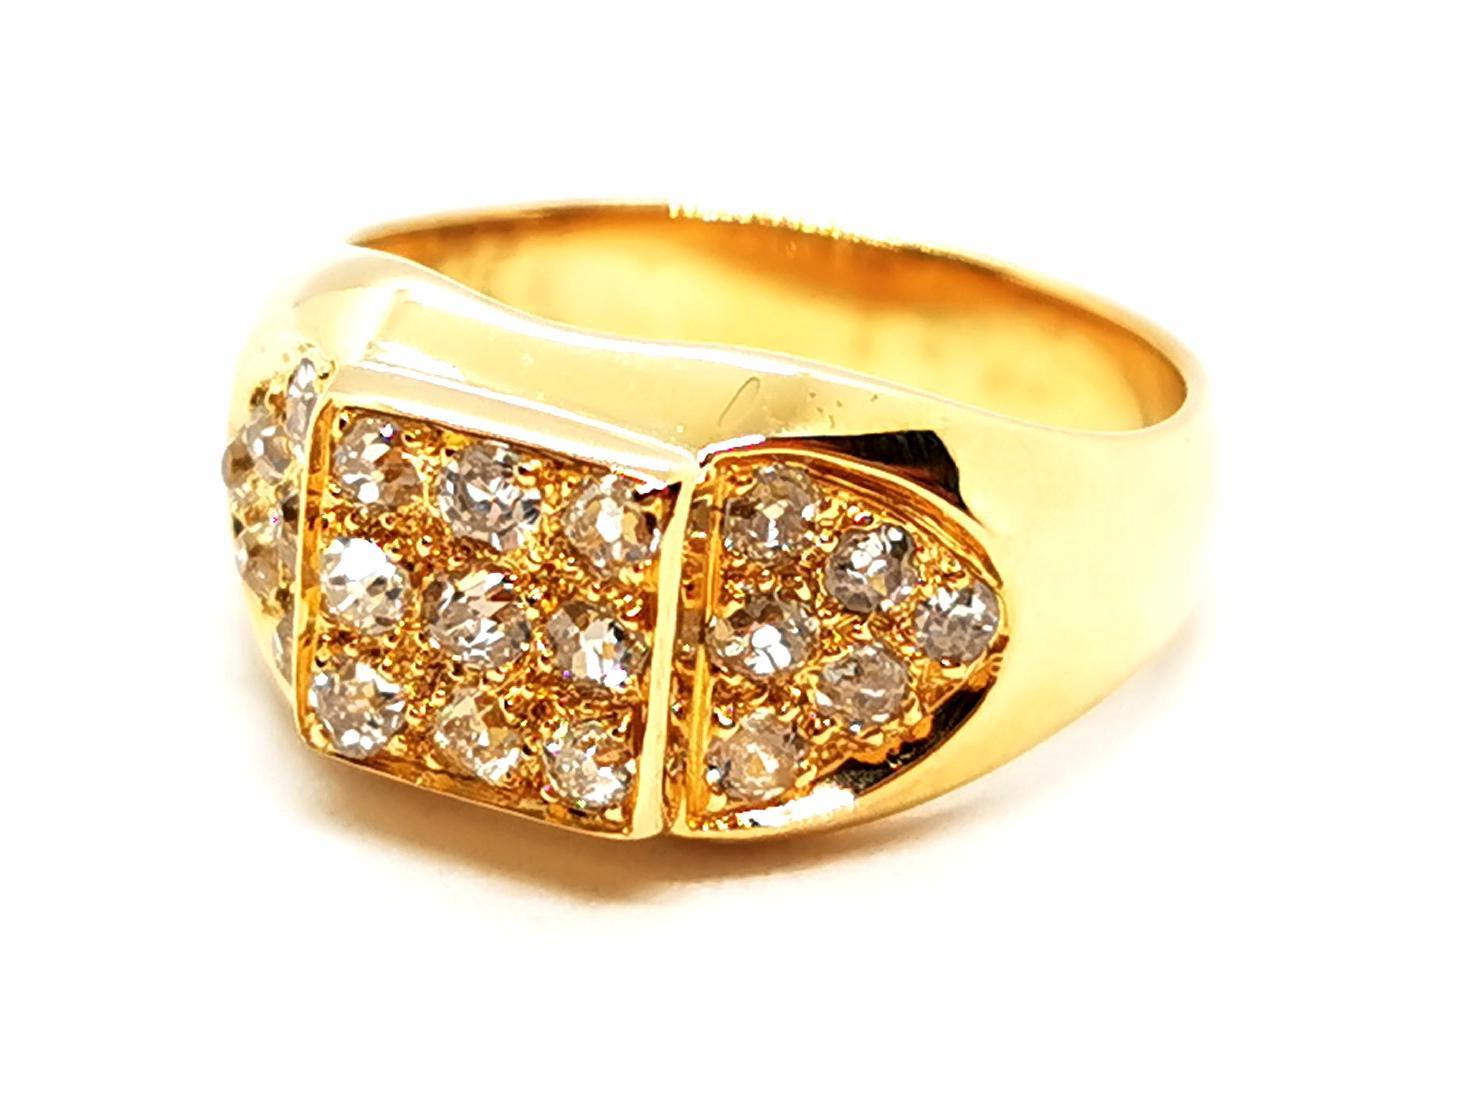 Diamond ring. in yellow gold 750 thousandths (18 carats). set with 21 diamonds. old cut. about 0.025 ct each. total weight diamonds about 0.525 ct. finger circumference: 51. width on top: 0.95 cm. total weight: 7.02 g. eagle head hallmark. excellent